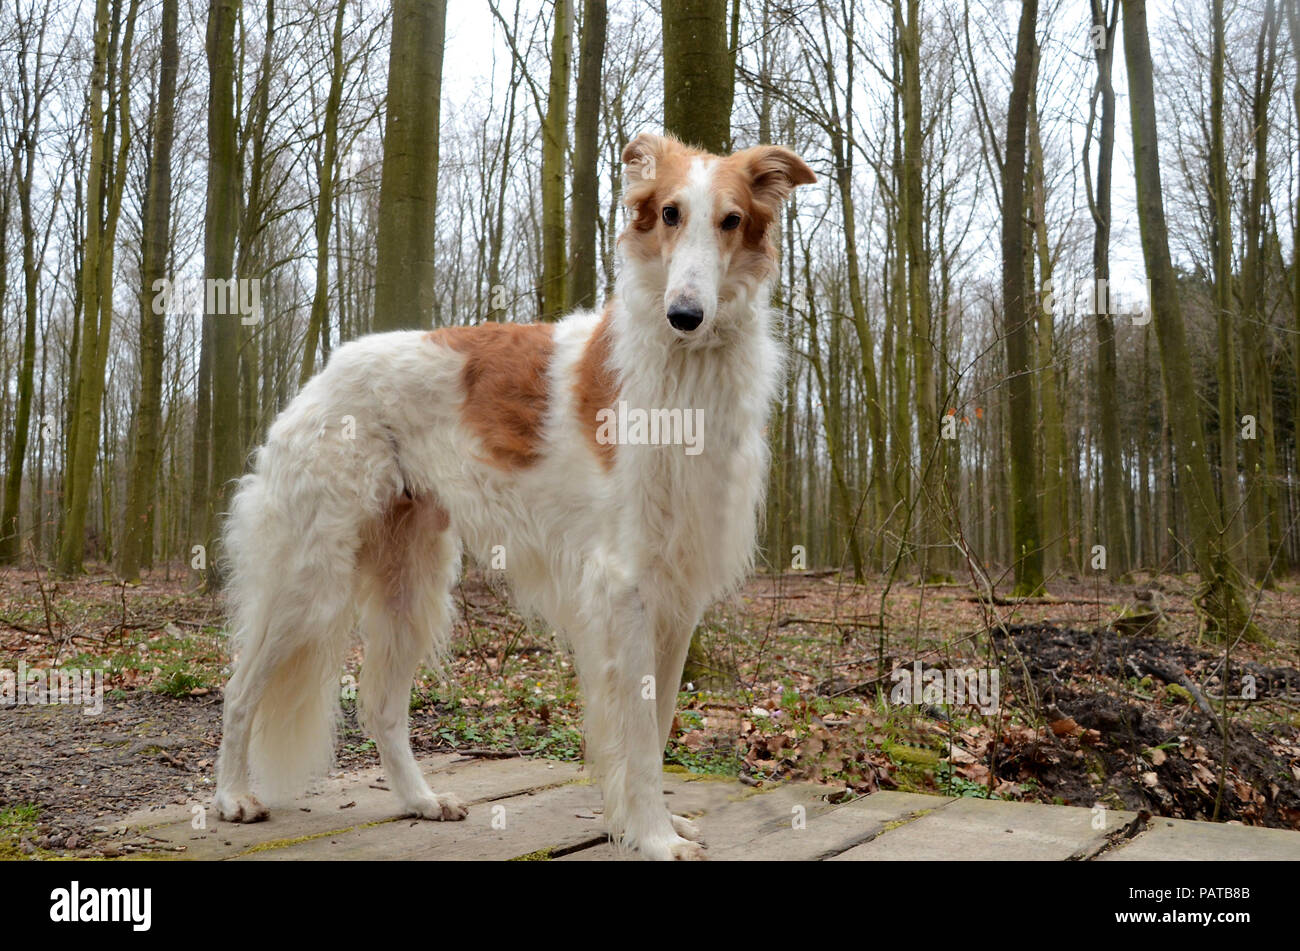 Noble borzoi dog stands on a decayed wooden bridge. Stock Photo